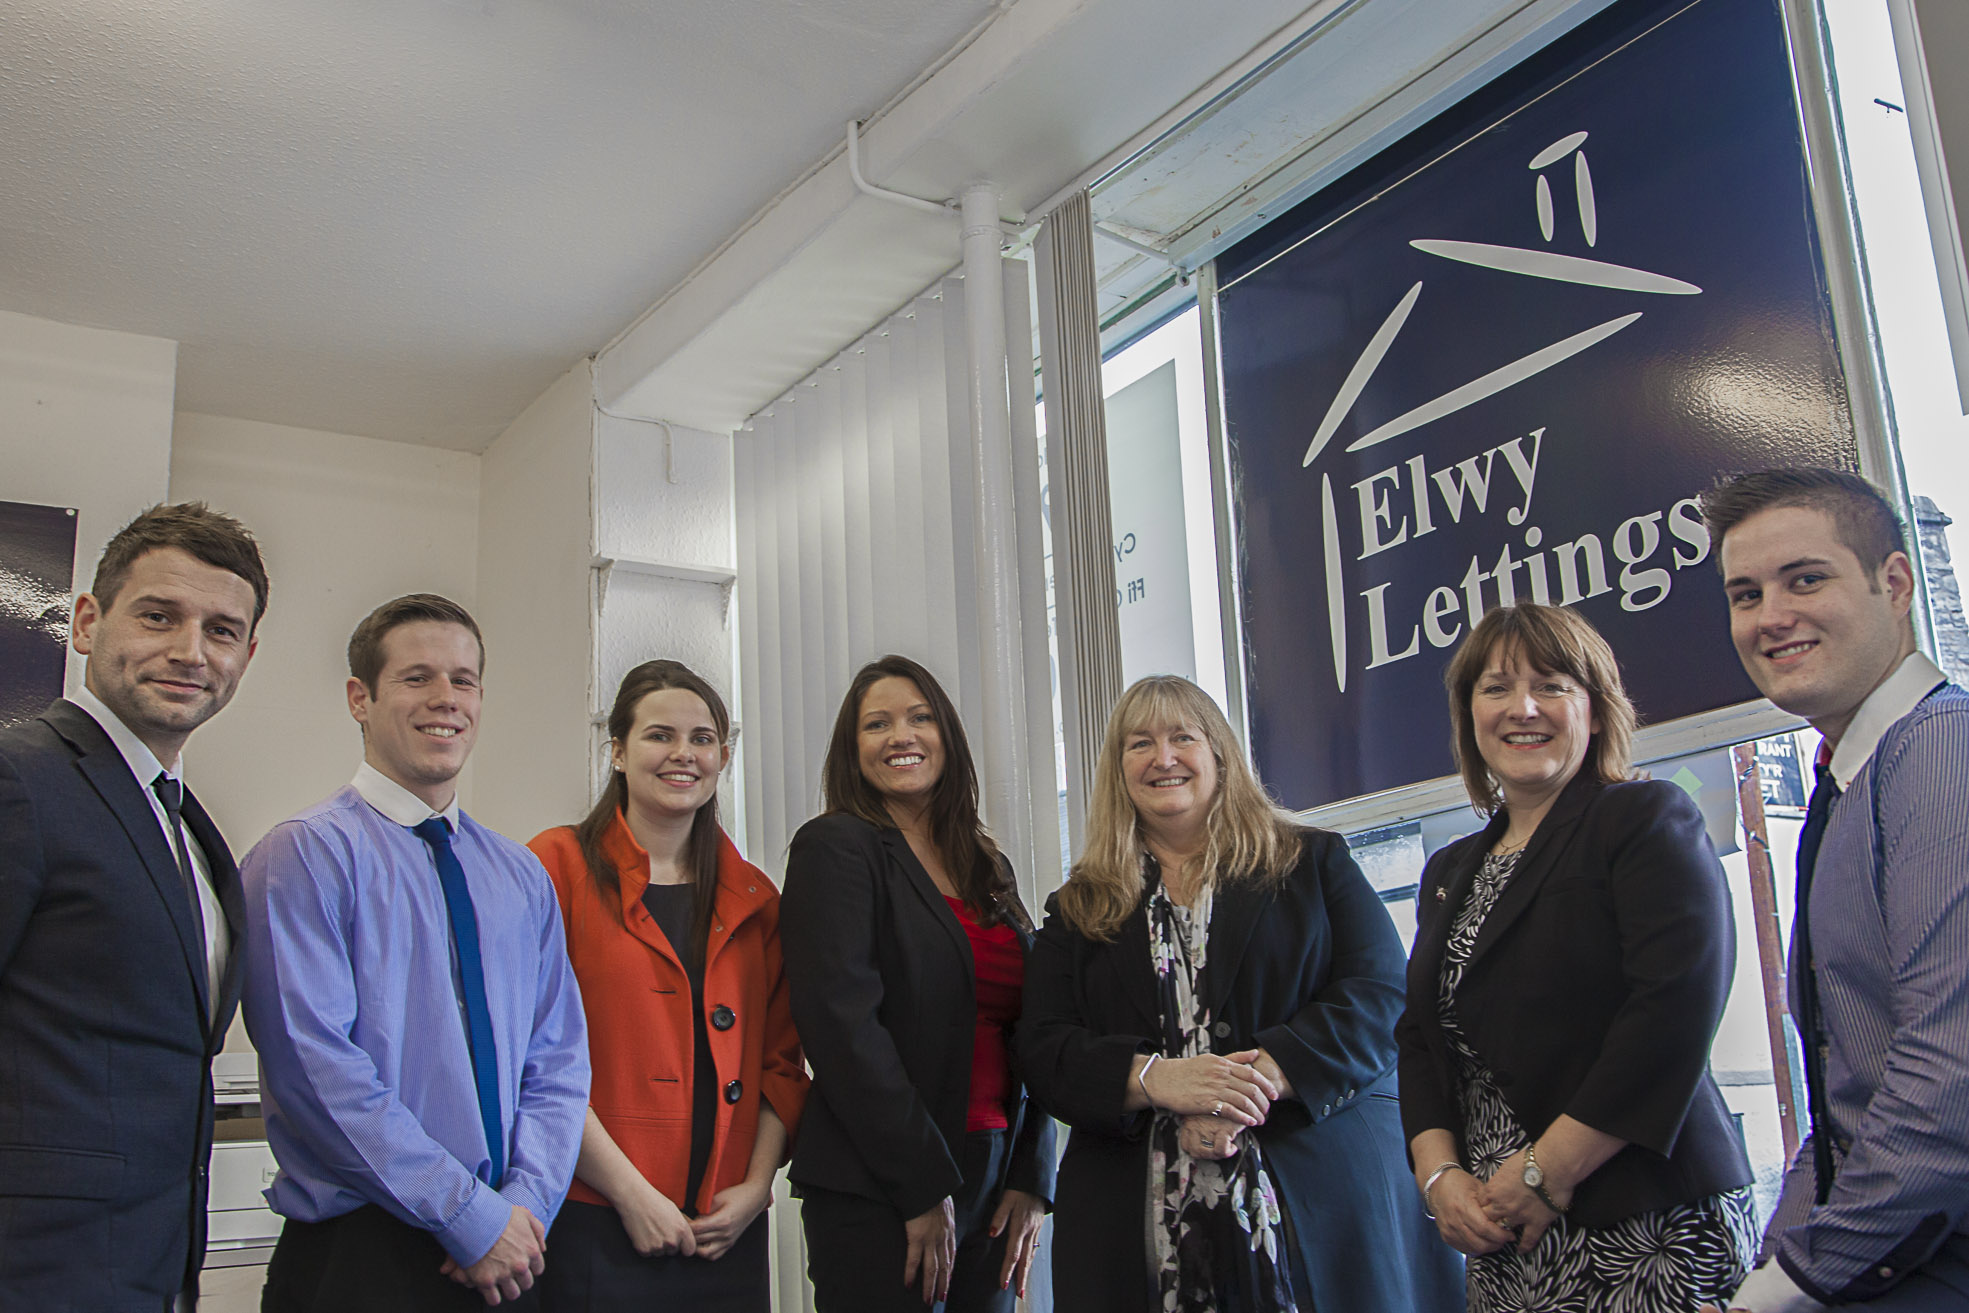 North Wales lettings agency doubles in size in a year